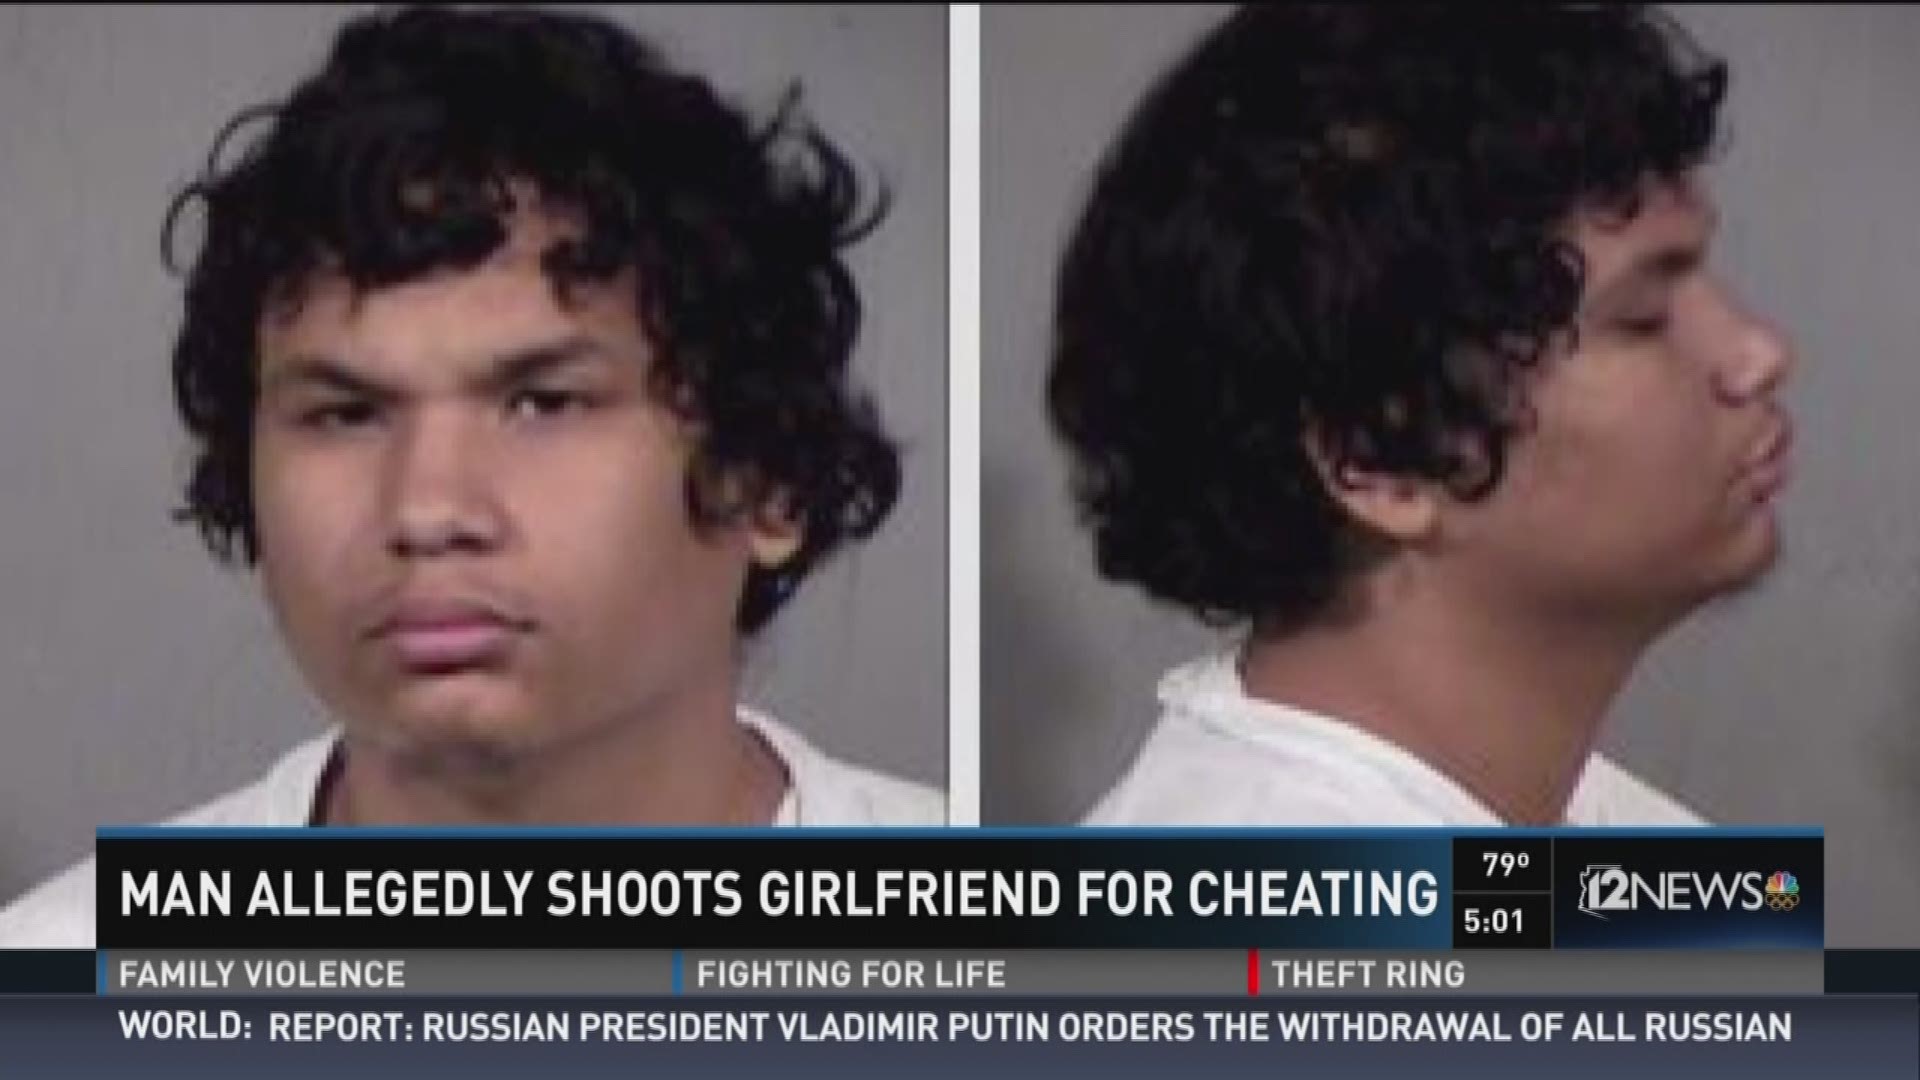 Man allegedly shoots girlfriend for cheating 12news pic